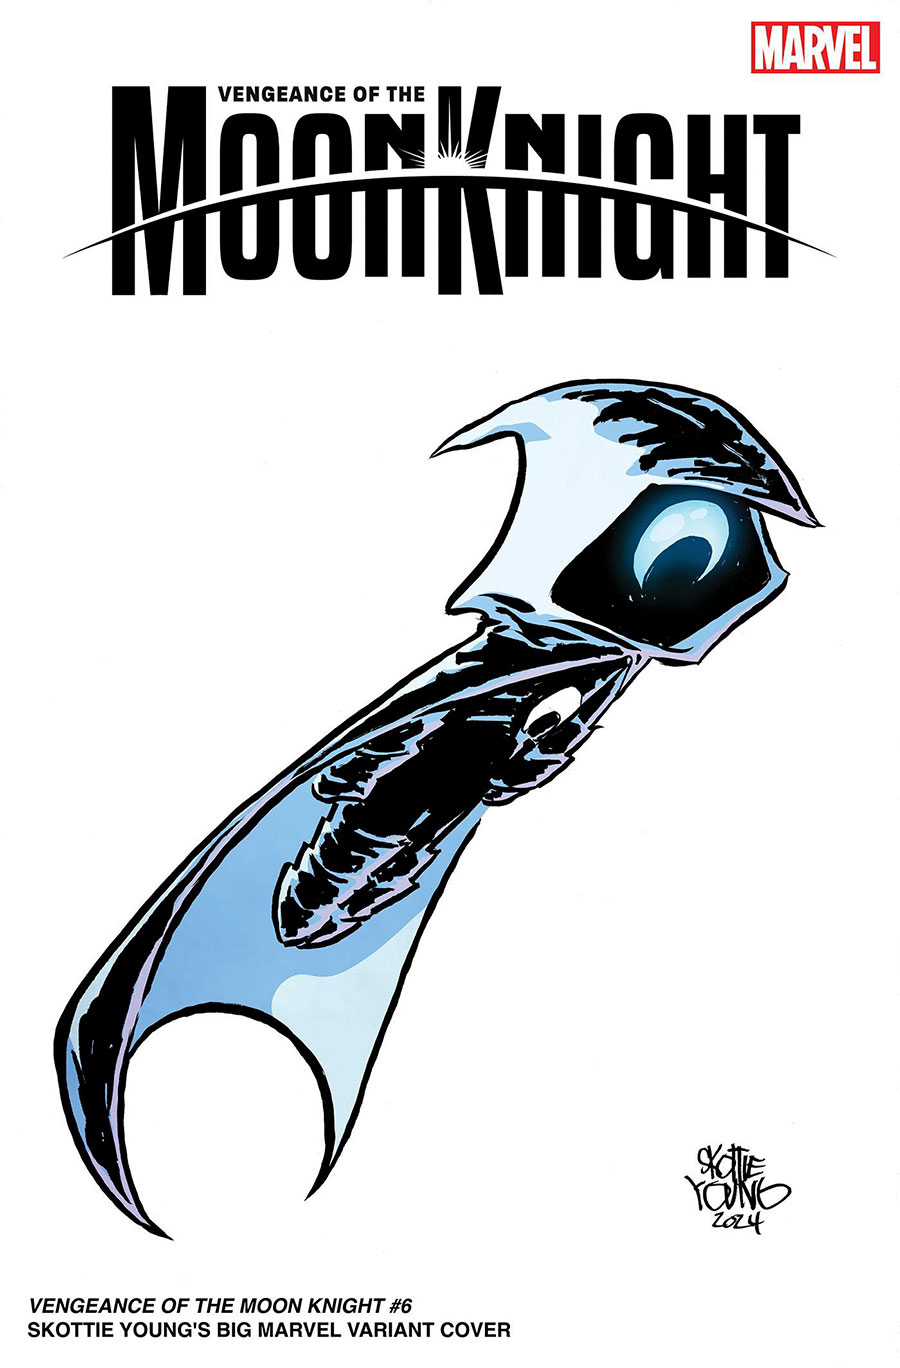 Vengeance Of The Moon Knight Vol 2 #6 Cover B Variant Skottie Youngs Big Marvels Cover (Blood Hunt Tie-In)